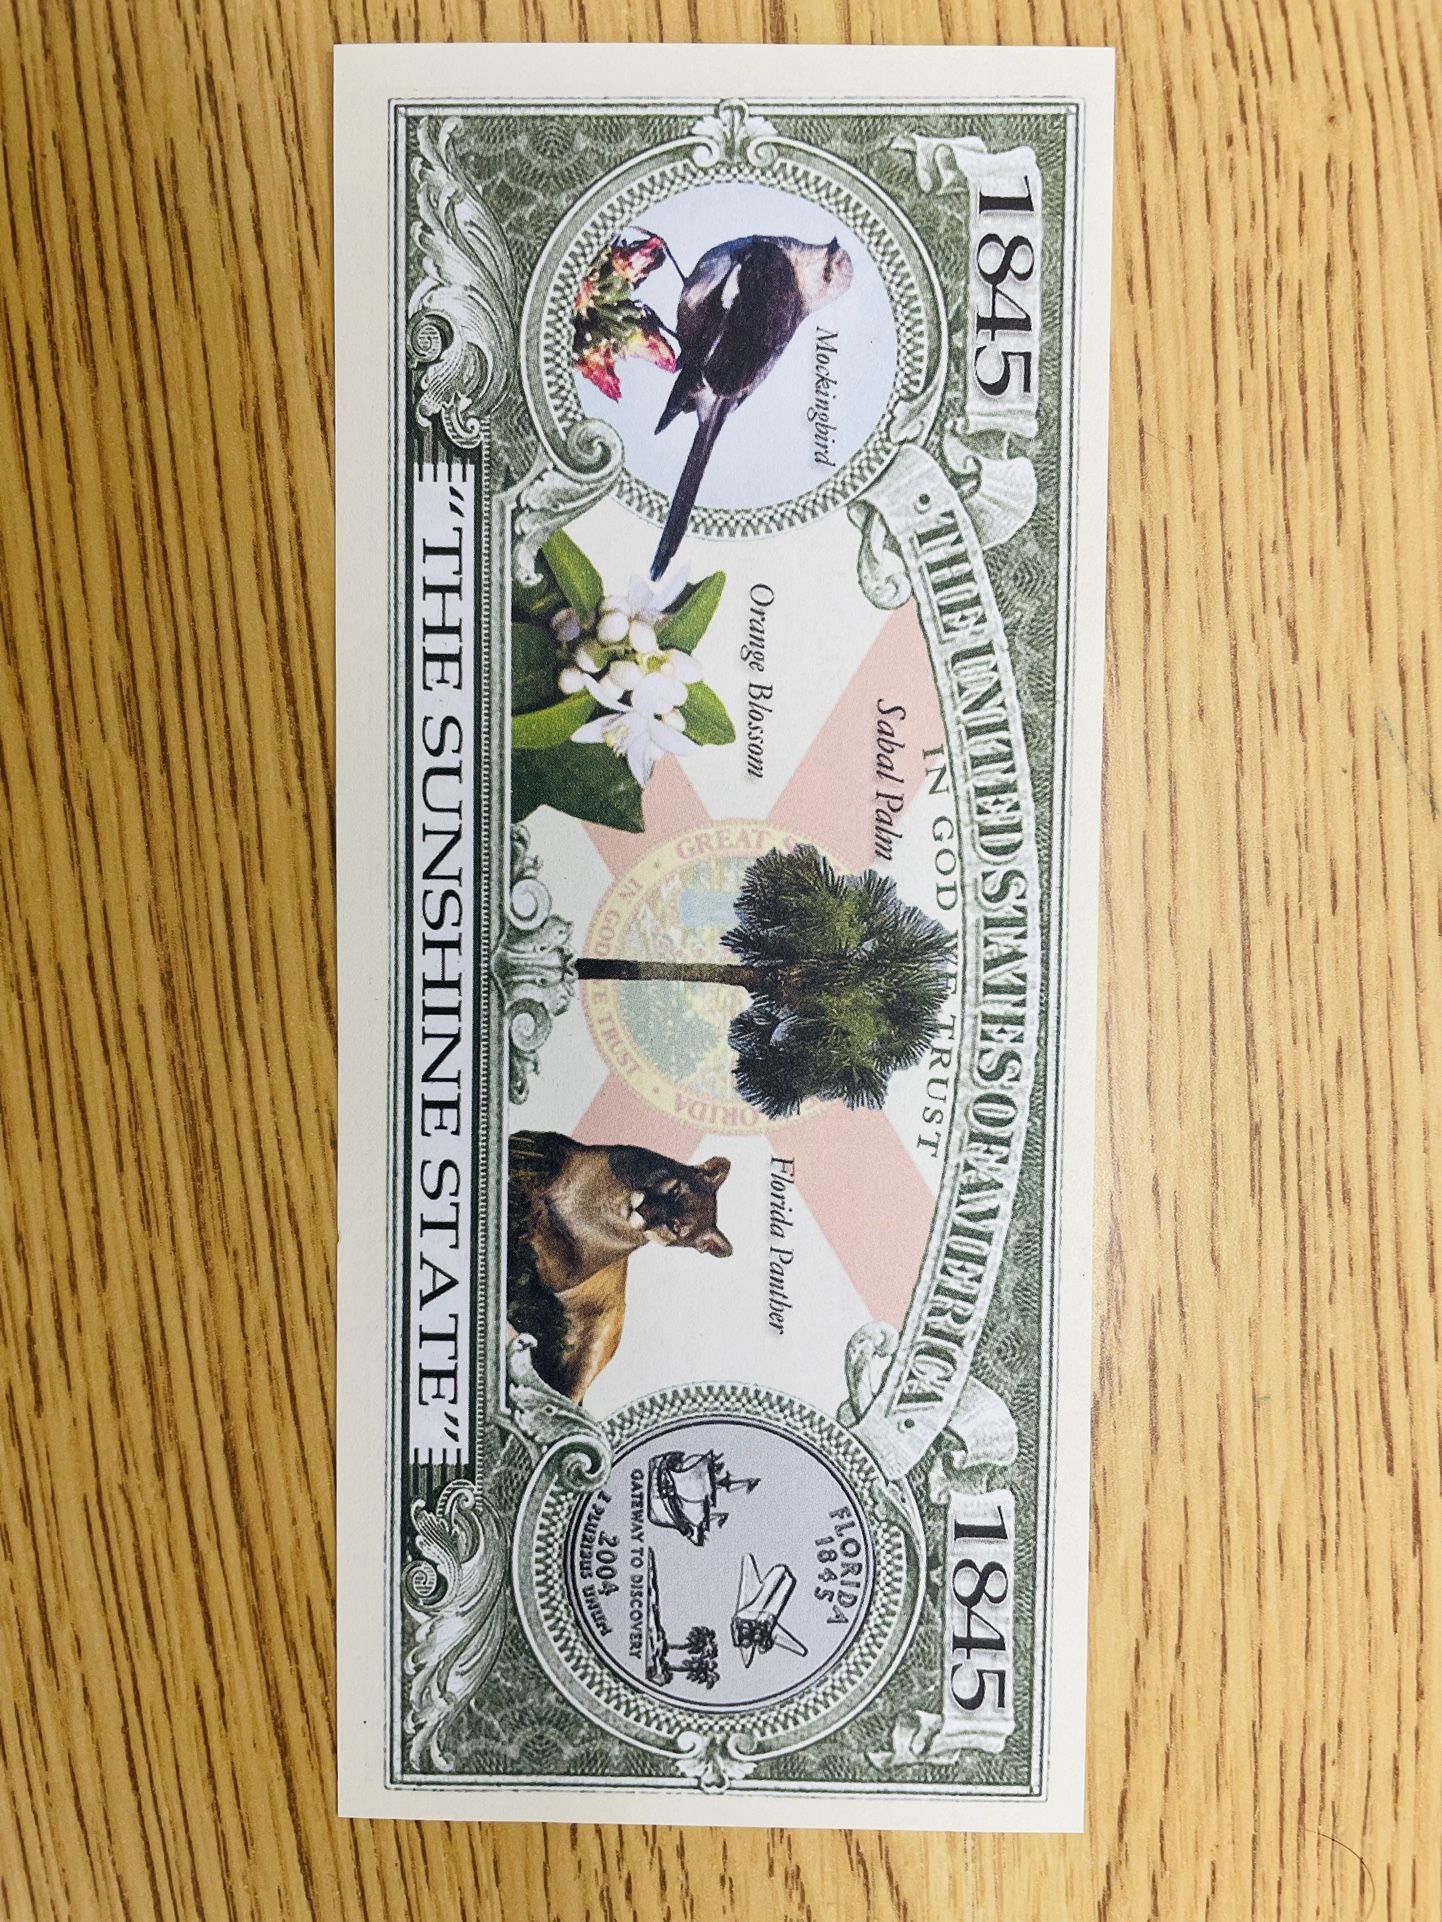 Florida Commemorative bill $20.00 CASH, TEXT FOR PRICES. 